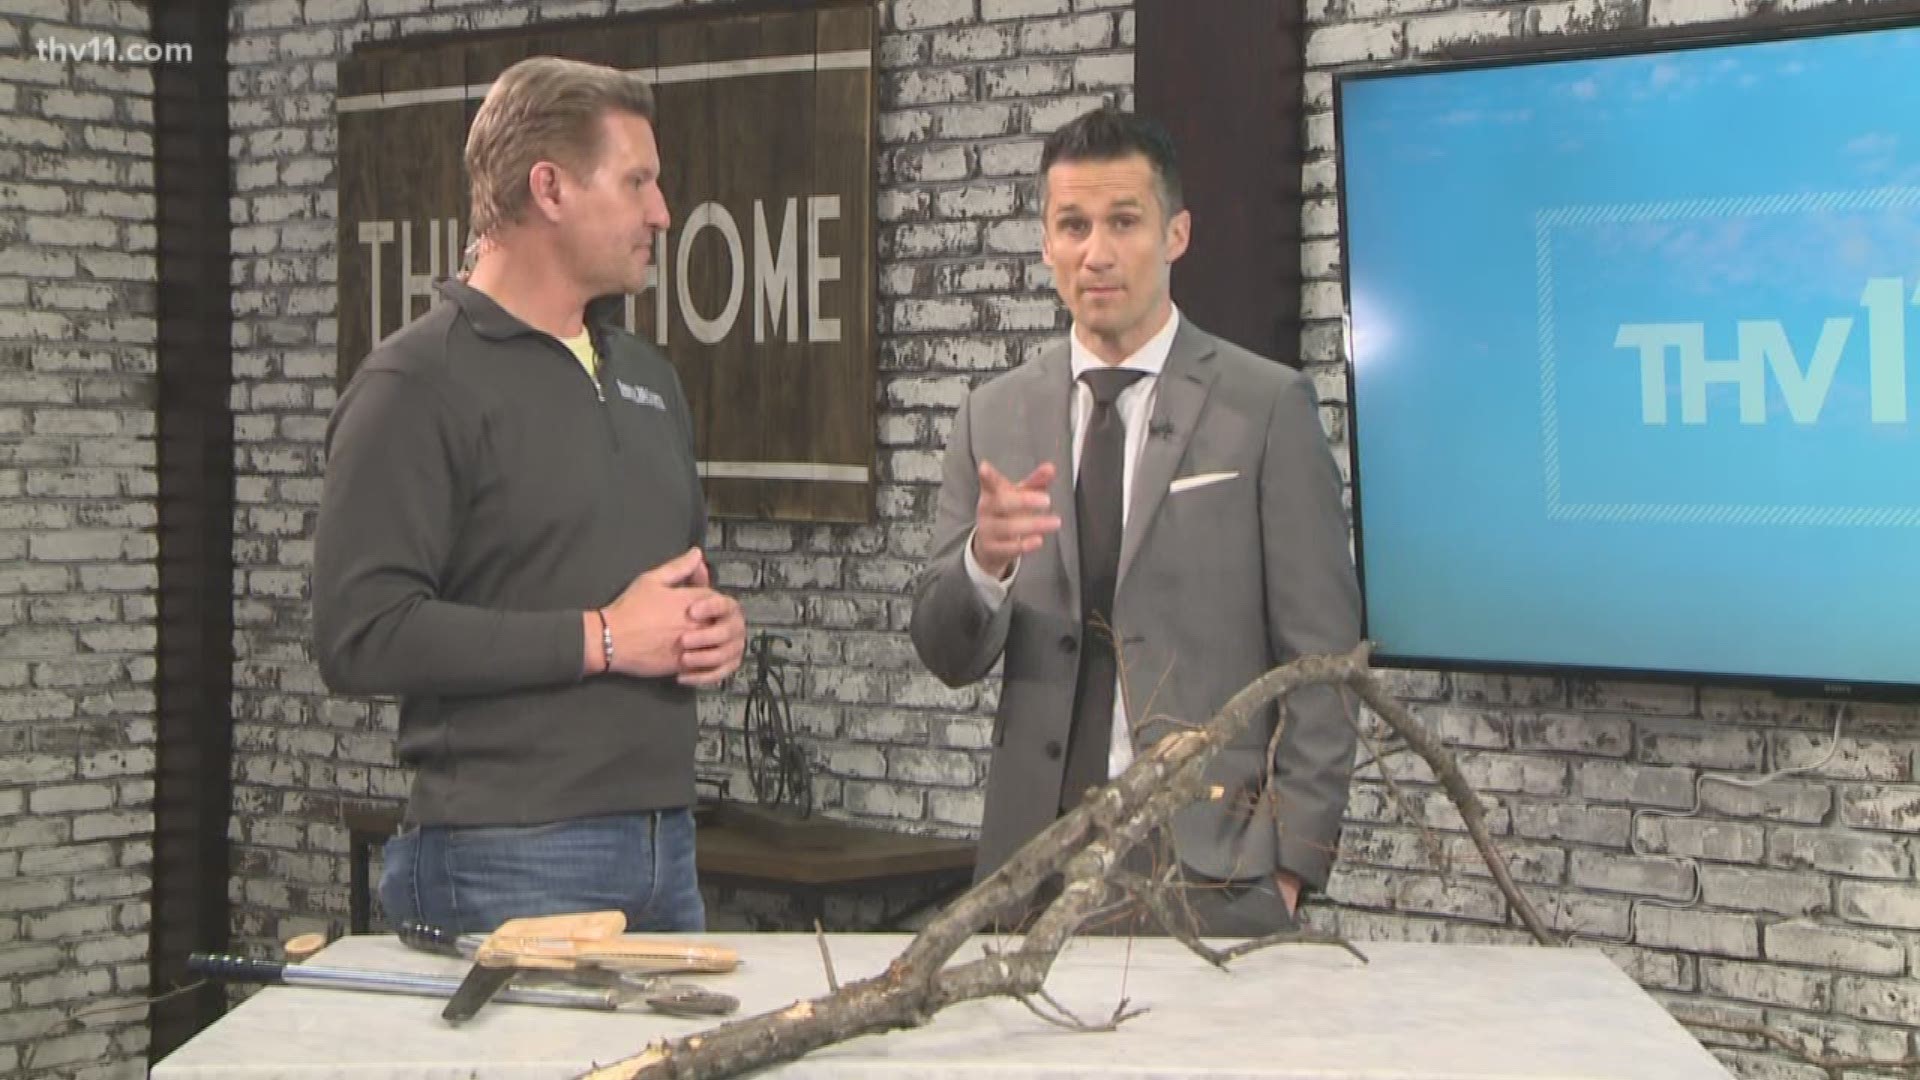 Chris H. Olsen shows us how to cut limbs to allow for the best healing.